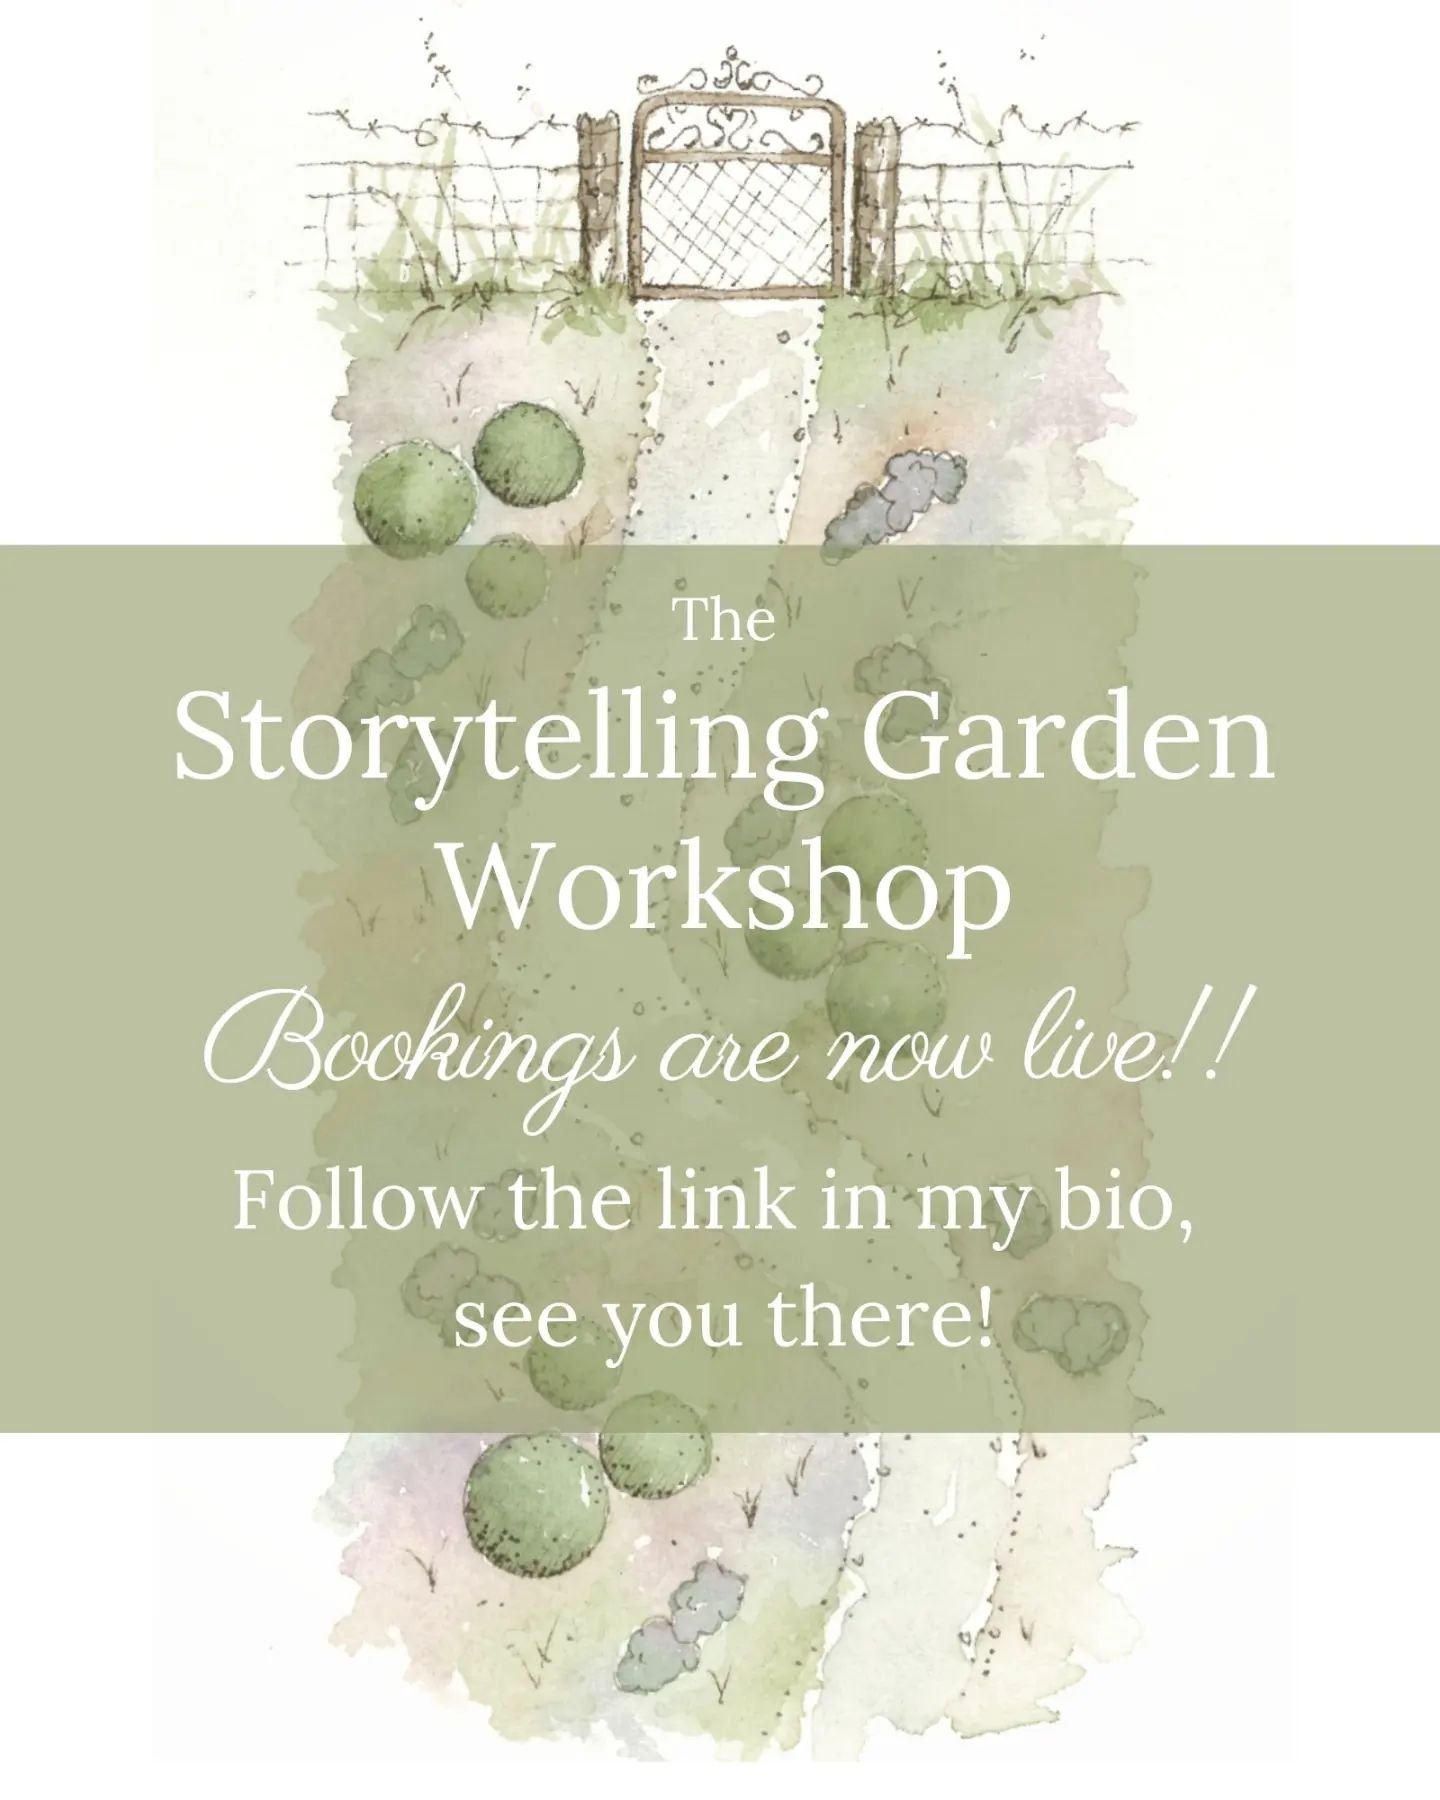 Bookings for the next Storytelling Garden Workshop are open! You'll find all the info via the links in my bio. See you garden-side.  Cx
.
.
.
#gardendesignworkshops #gardendesignworkshop #diygarden #gardenmakingworkshop #gardendesign #gardendesigncou